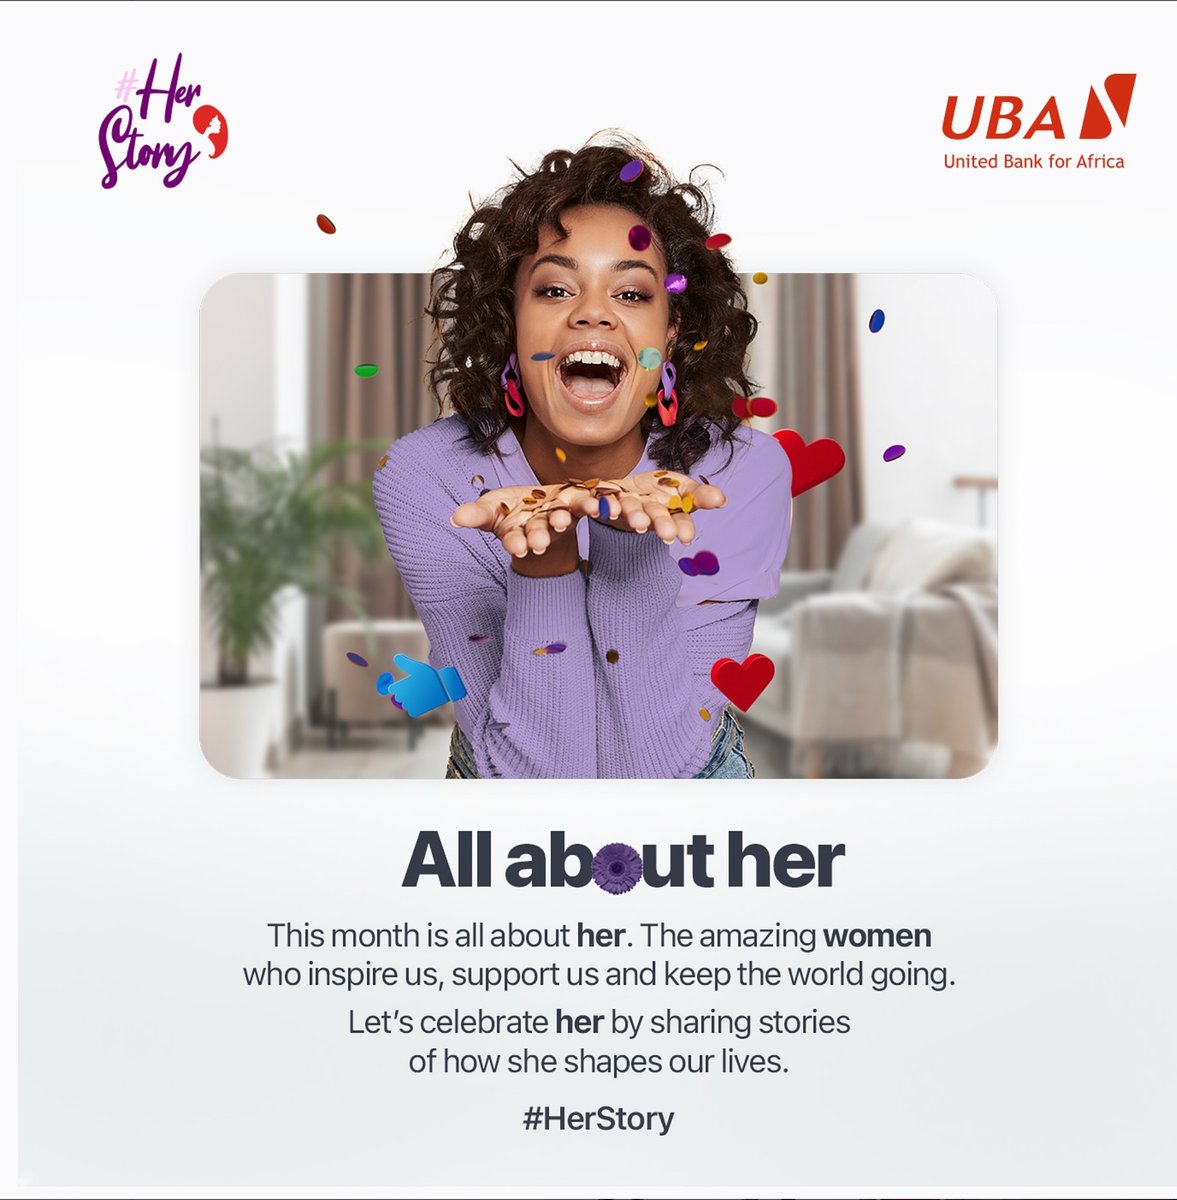 Celebrating #HerStory and the incredible women who inspire us every day. Here’s to strength, resilience, and empowerment. 💪🏽

'Women are not only agents of change, they are powerful agents of change.' Graca Machel

#AfricasGlobalBank 
#UBAHerStory